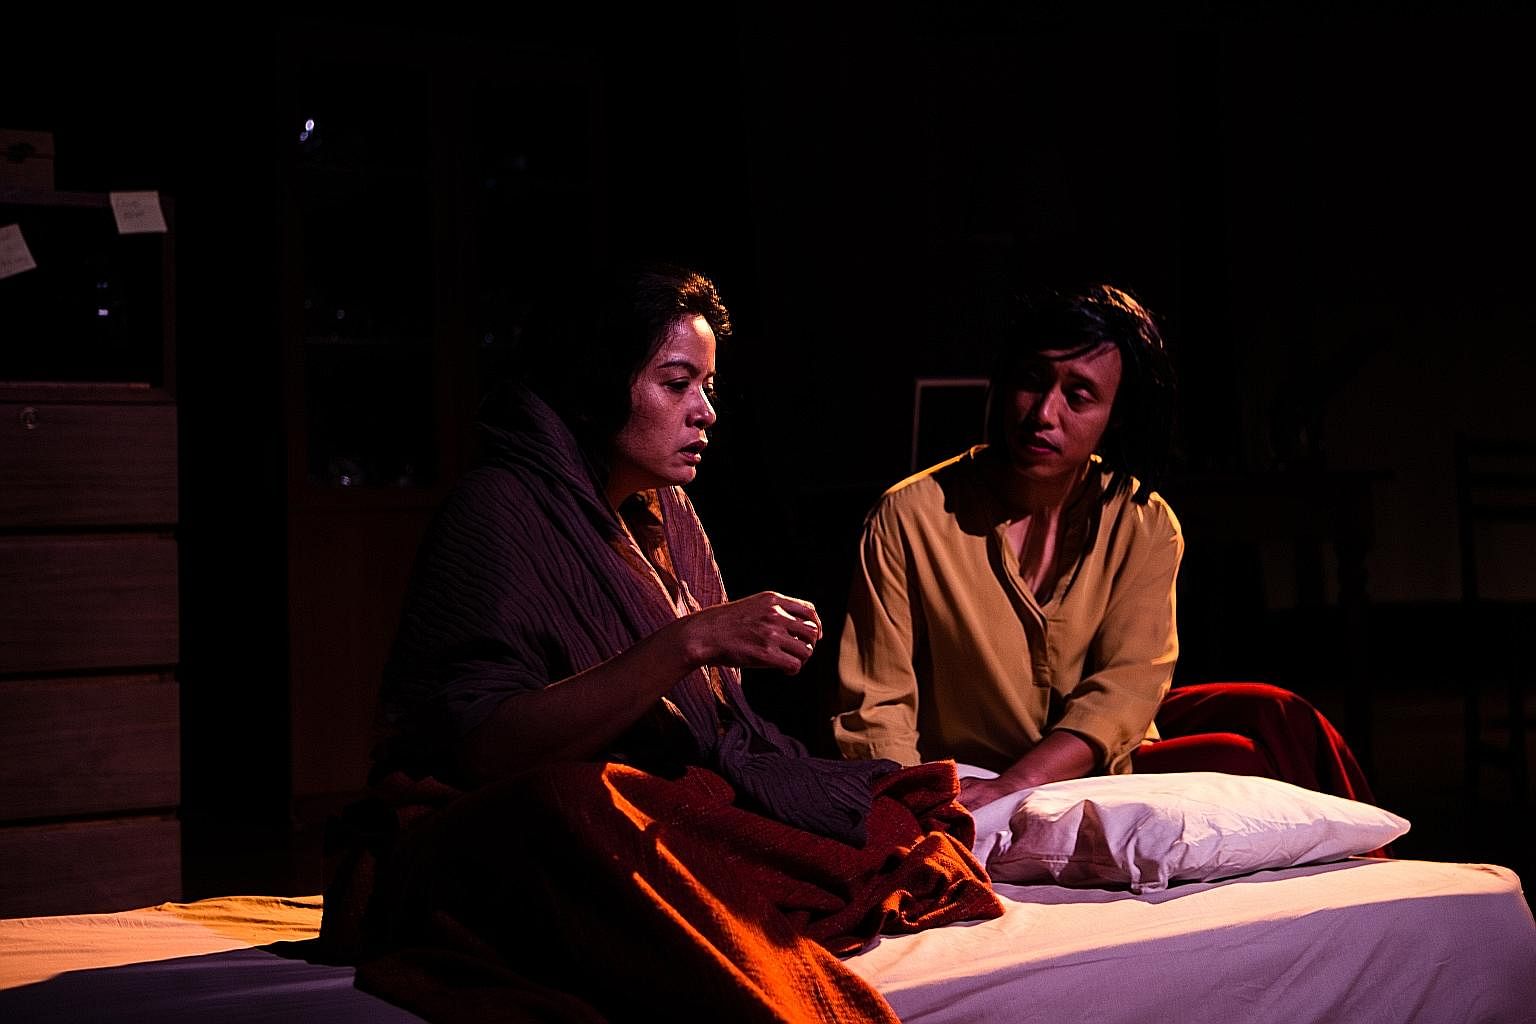 Norisham Osman (far right) is the daydreamer Mat Jenin and Siti Maznah plays the witch Nenek Kebayan in the musical, Alkesah. In Leda And The Rage, Edith Podesta (above left) plays a trauma expert and lecturer who grapples with post-traumatic stress 